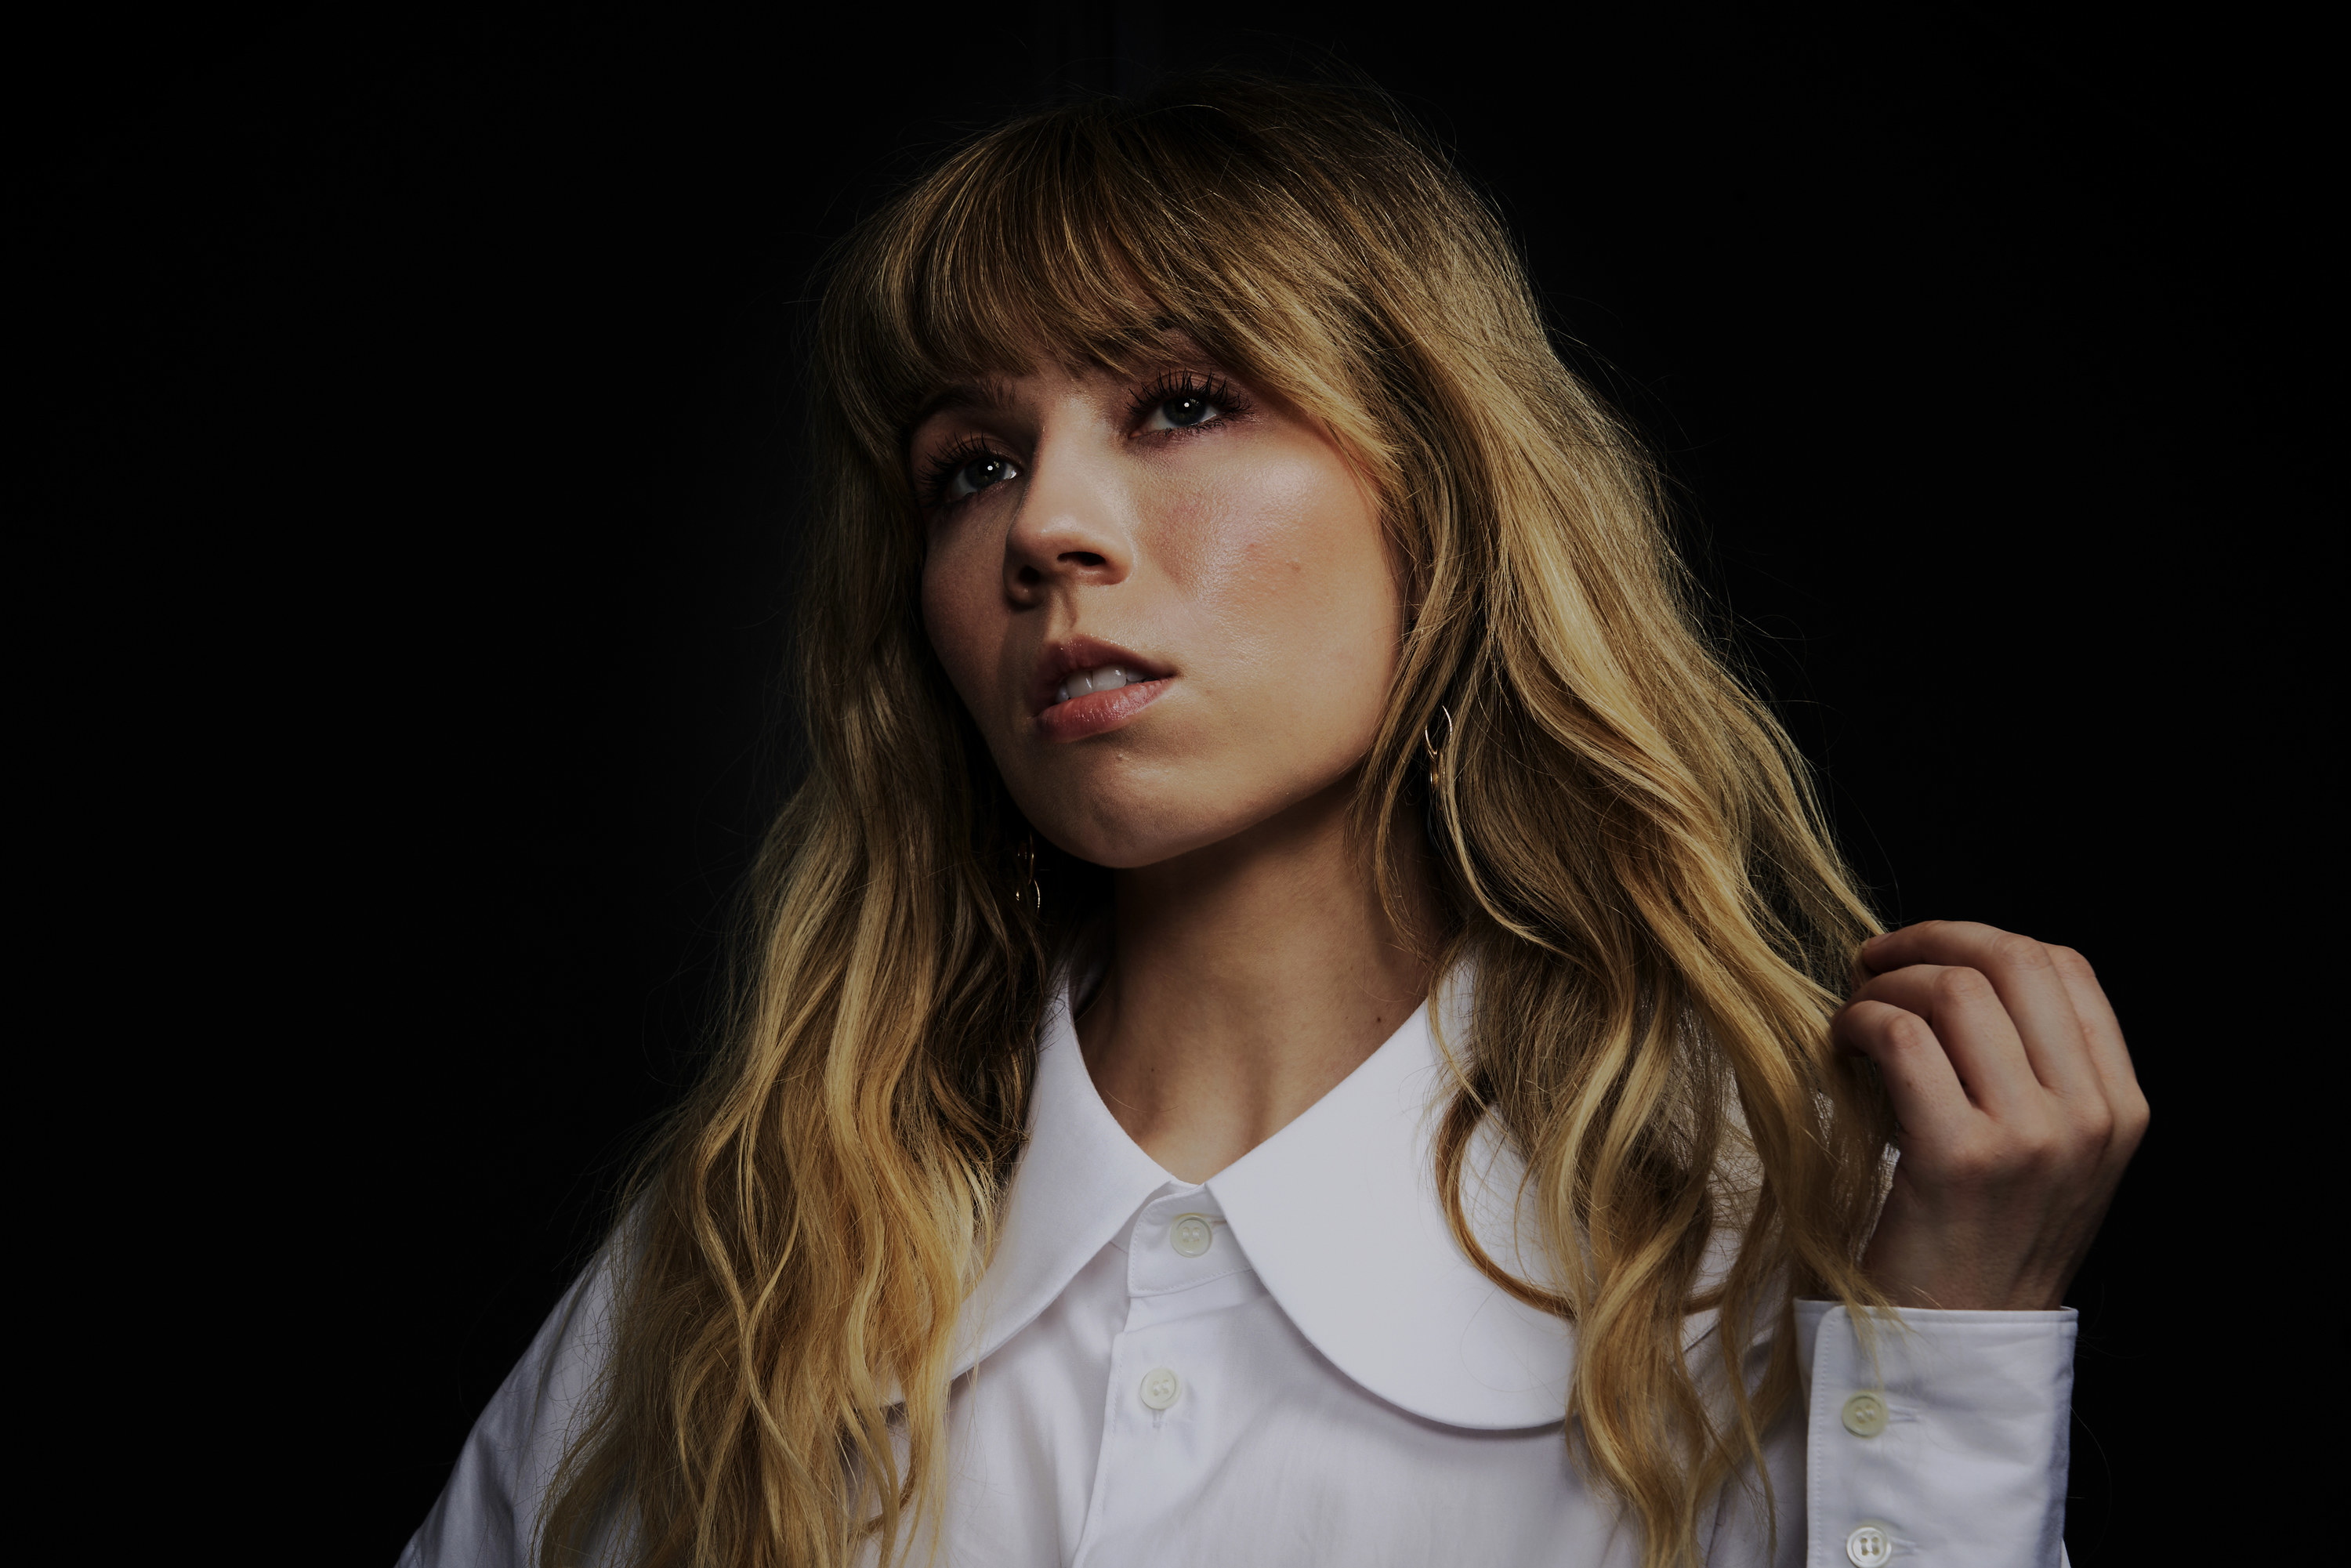 Jennette poses in front of a black background, looking into the distance with a serious expression; her mouth is slightly open and her long blonde hair is wavy, falling past her shoulders onto the white blouse she wears.